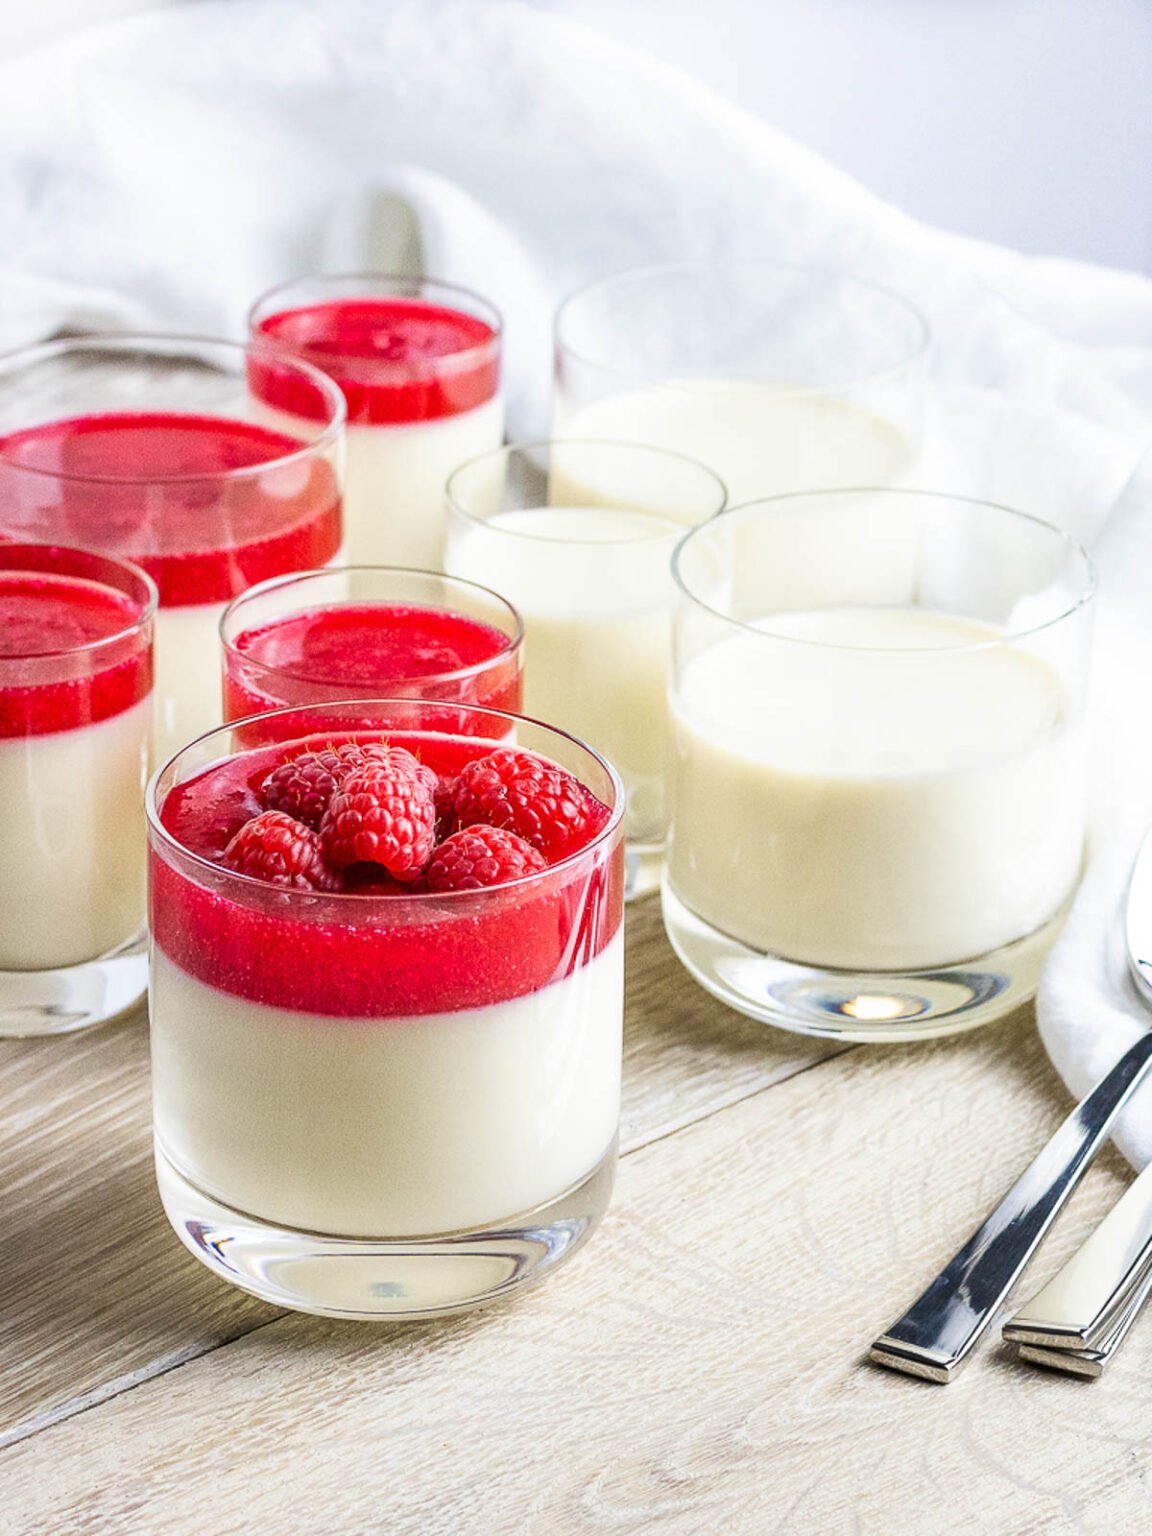 Creamy Panna Cotta Recipe with Cranberry Sauce - Drive Me Hungry